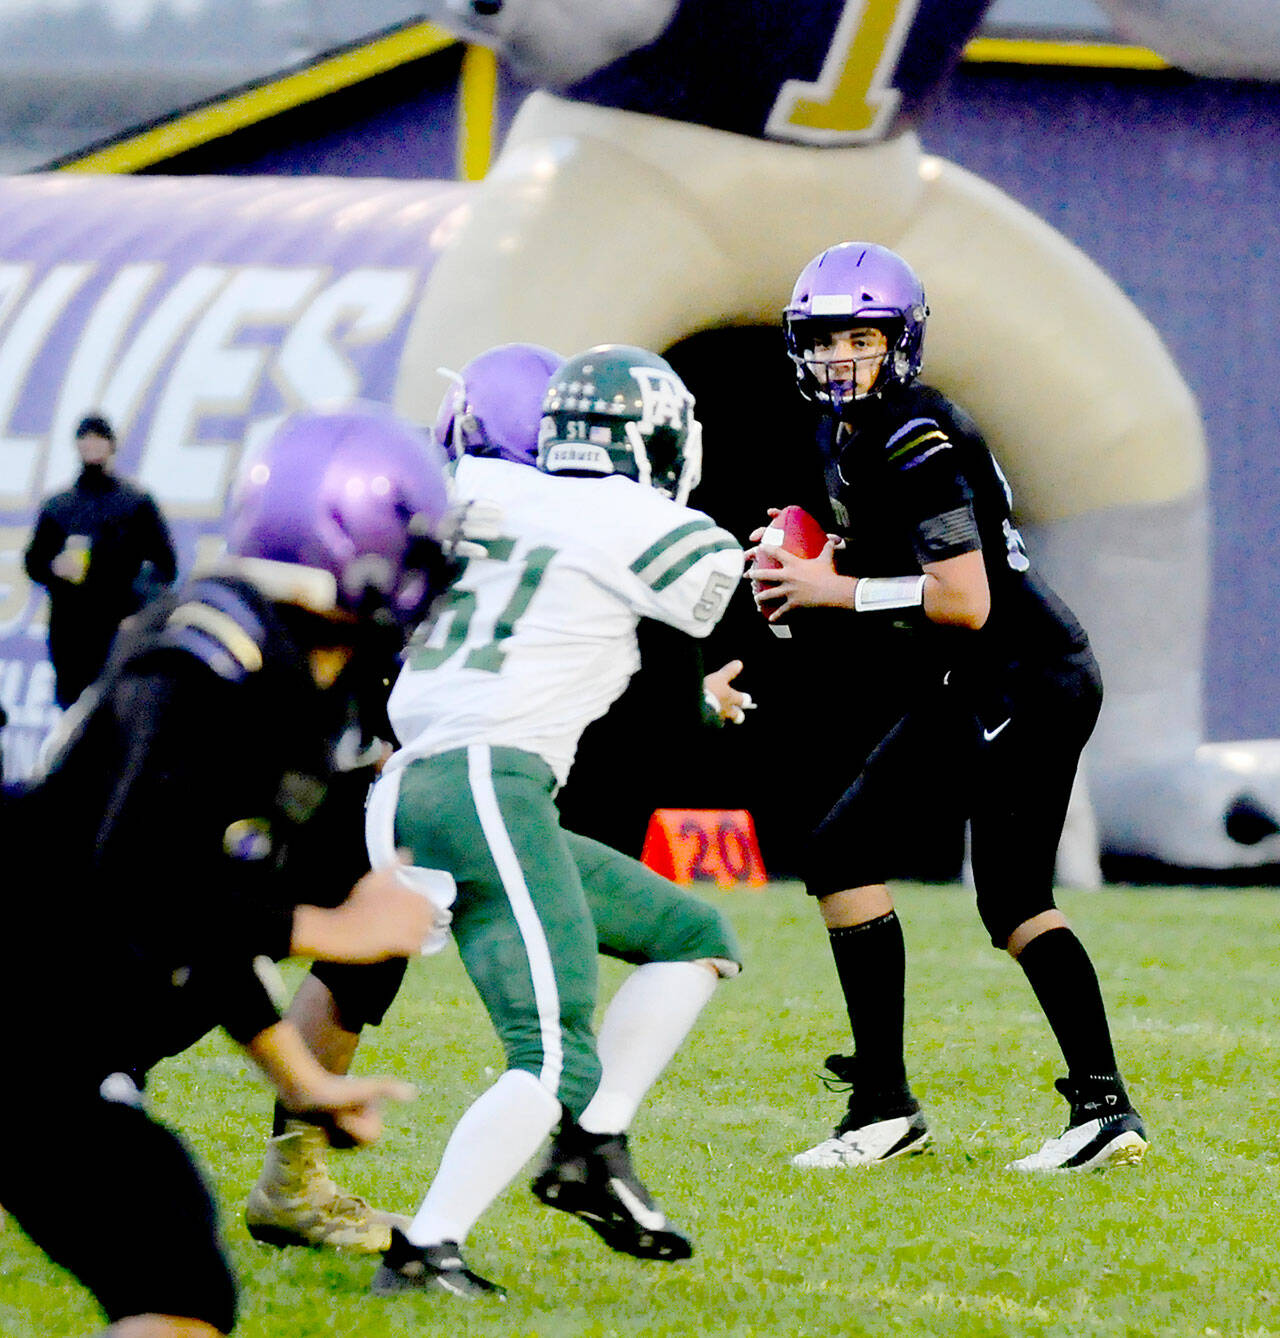 Sequim sophomore Lars Wiker made his first varsity start at quarterback during the Wolves’ 17-12 rivalry victory over Port Angeles. (Michael Dashiell/Olympic Peninsula News Group)